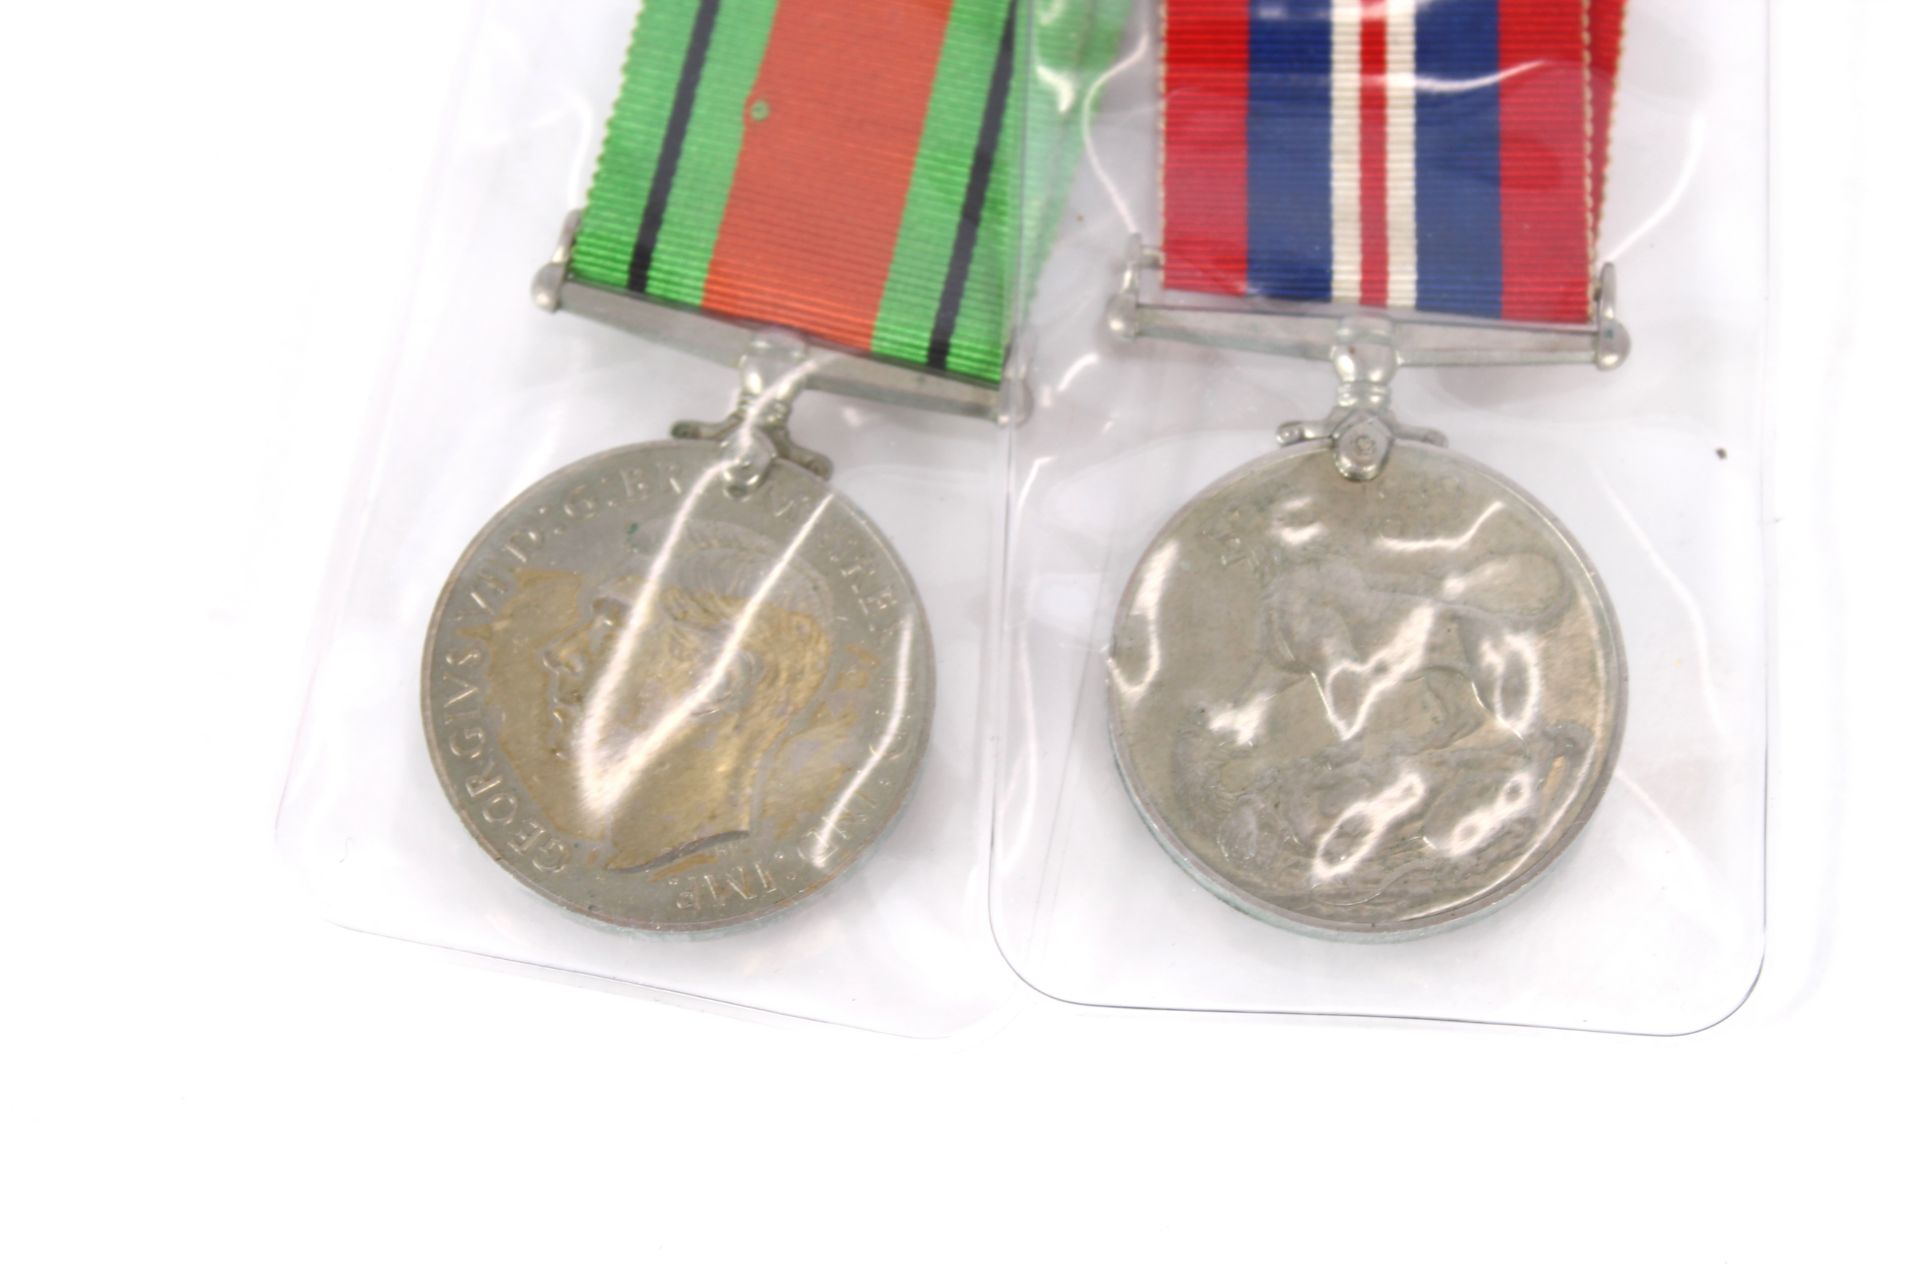 Six WWII medals including Italy and 39/45 Stars - Image 3 of 7